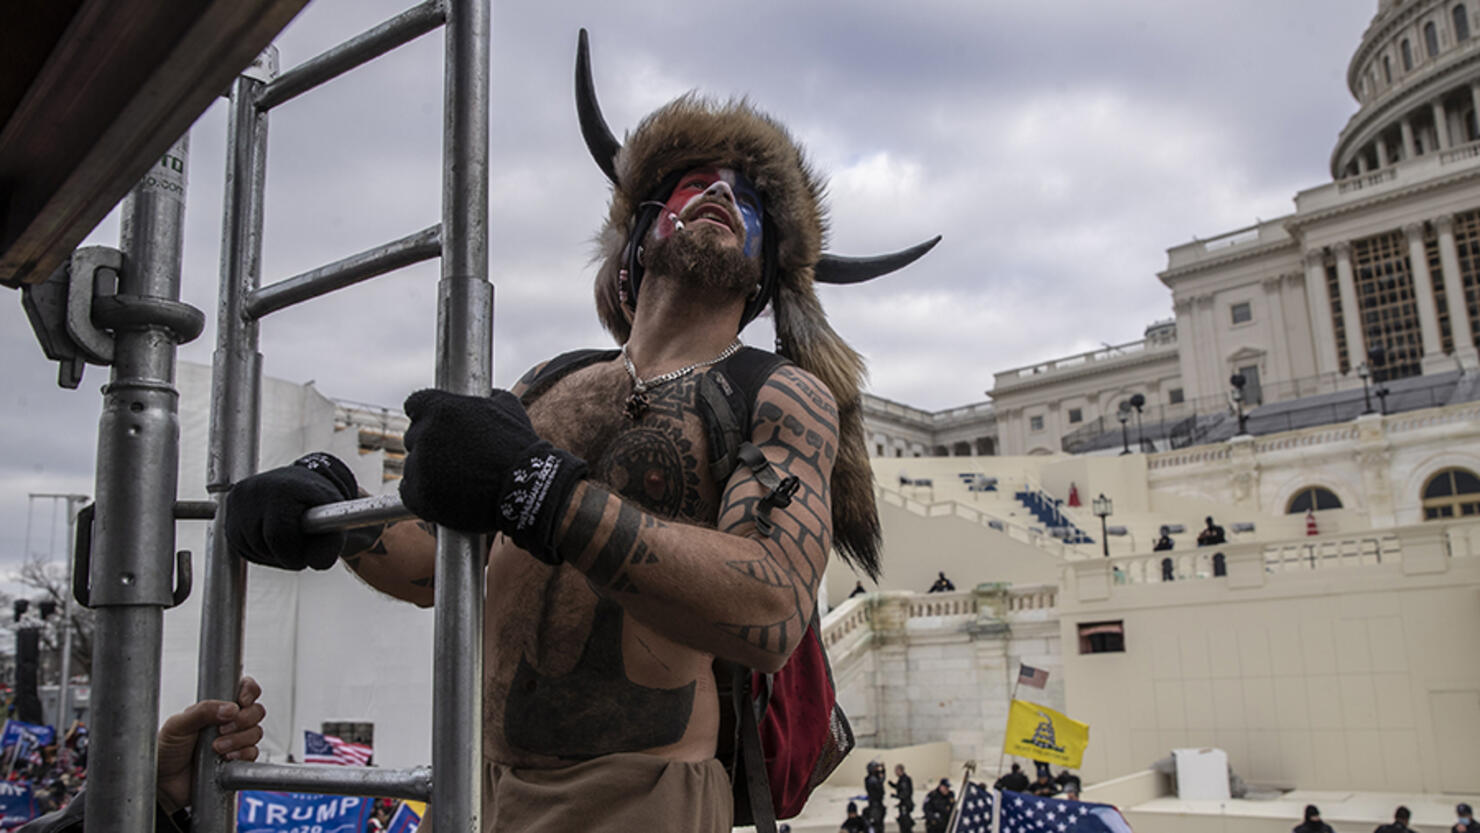 QAnon Shaman defends storming the Capitol, says he saved 